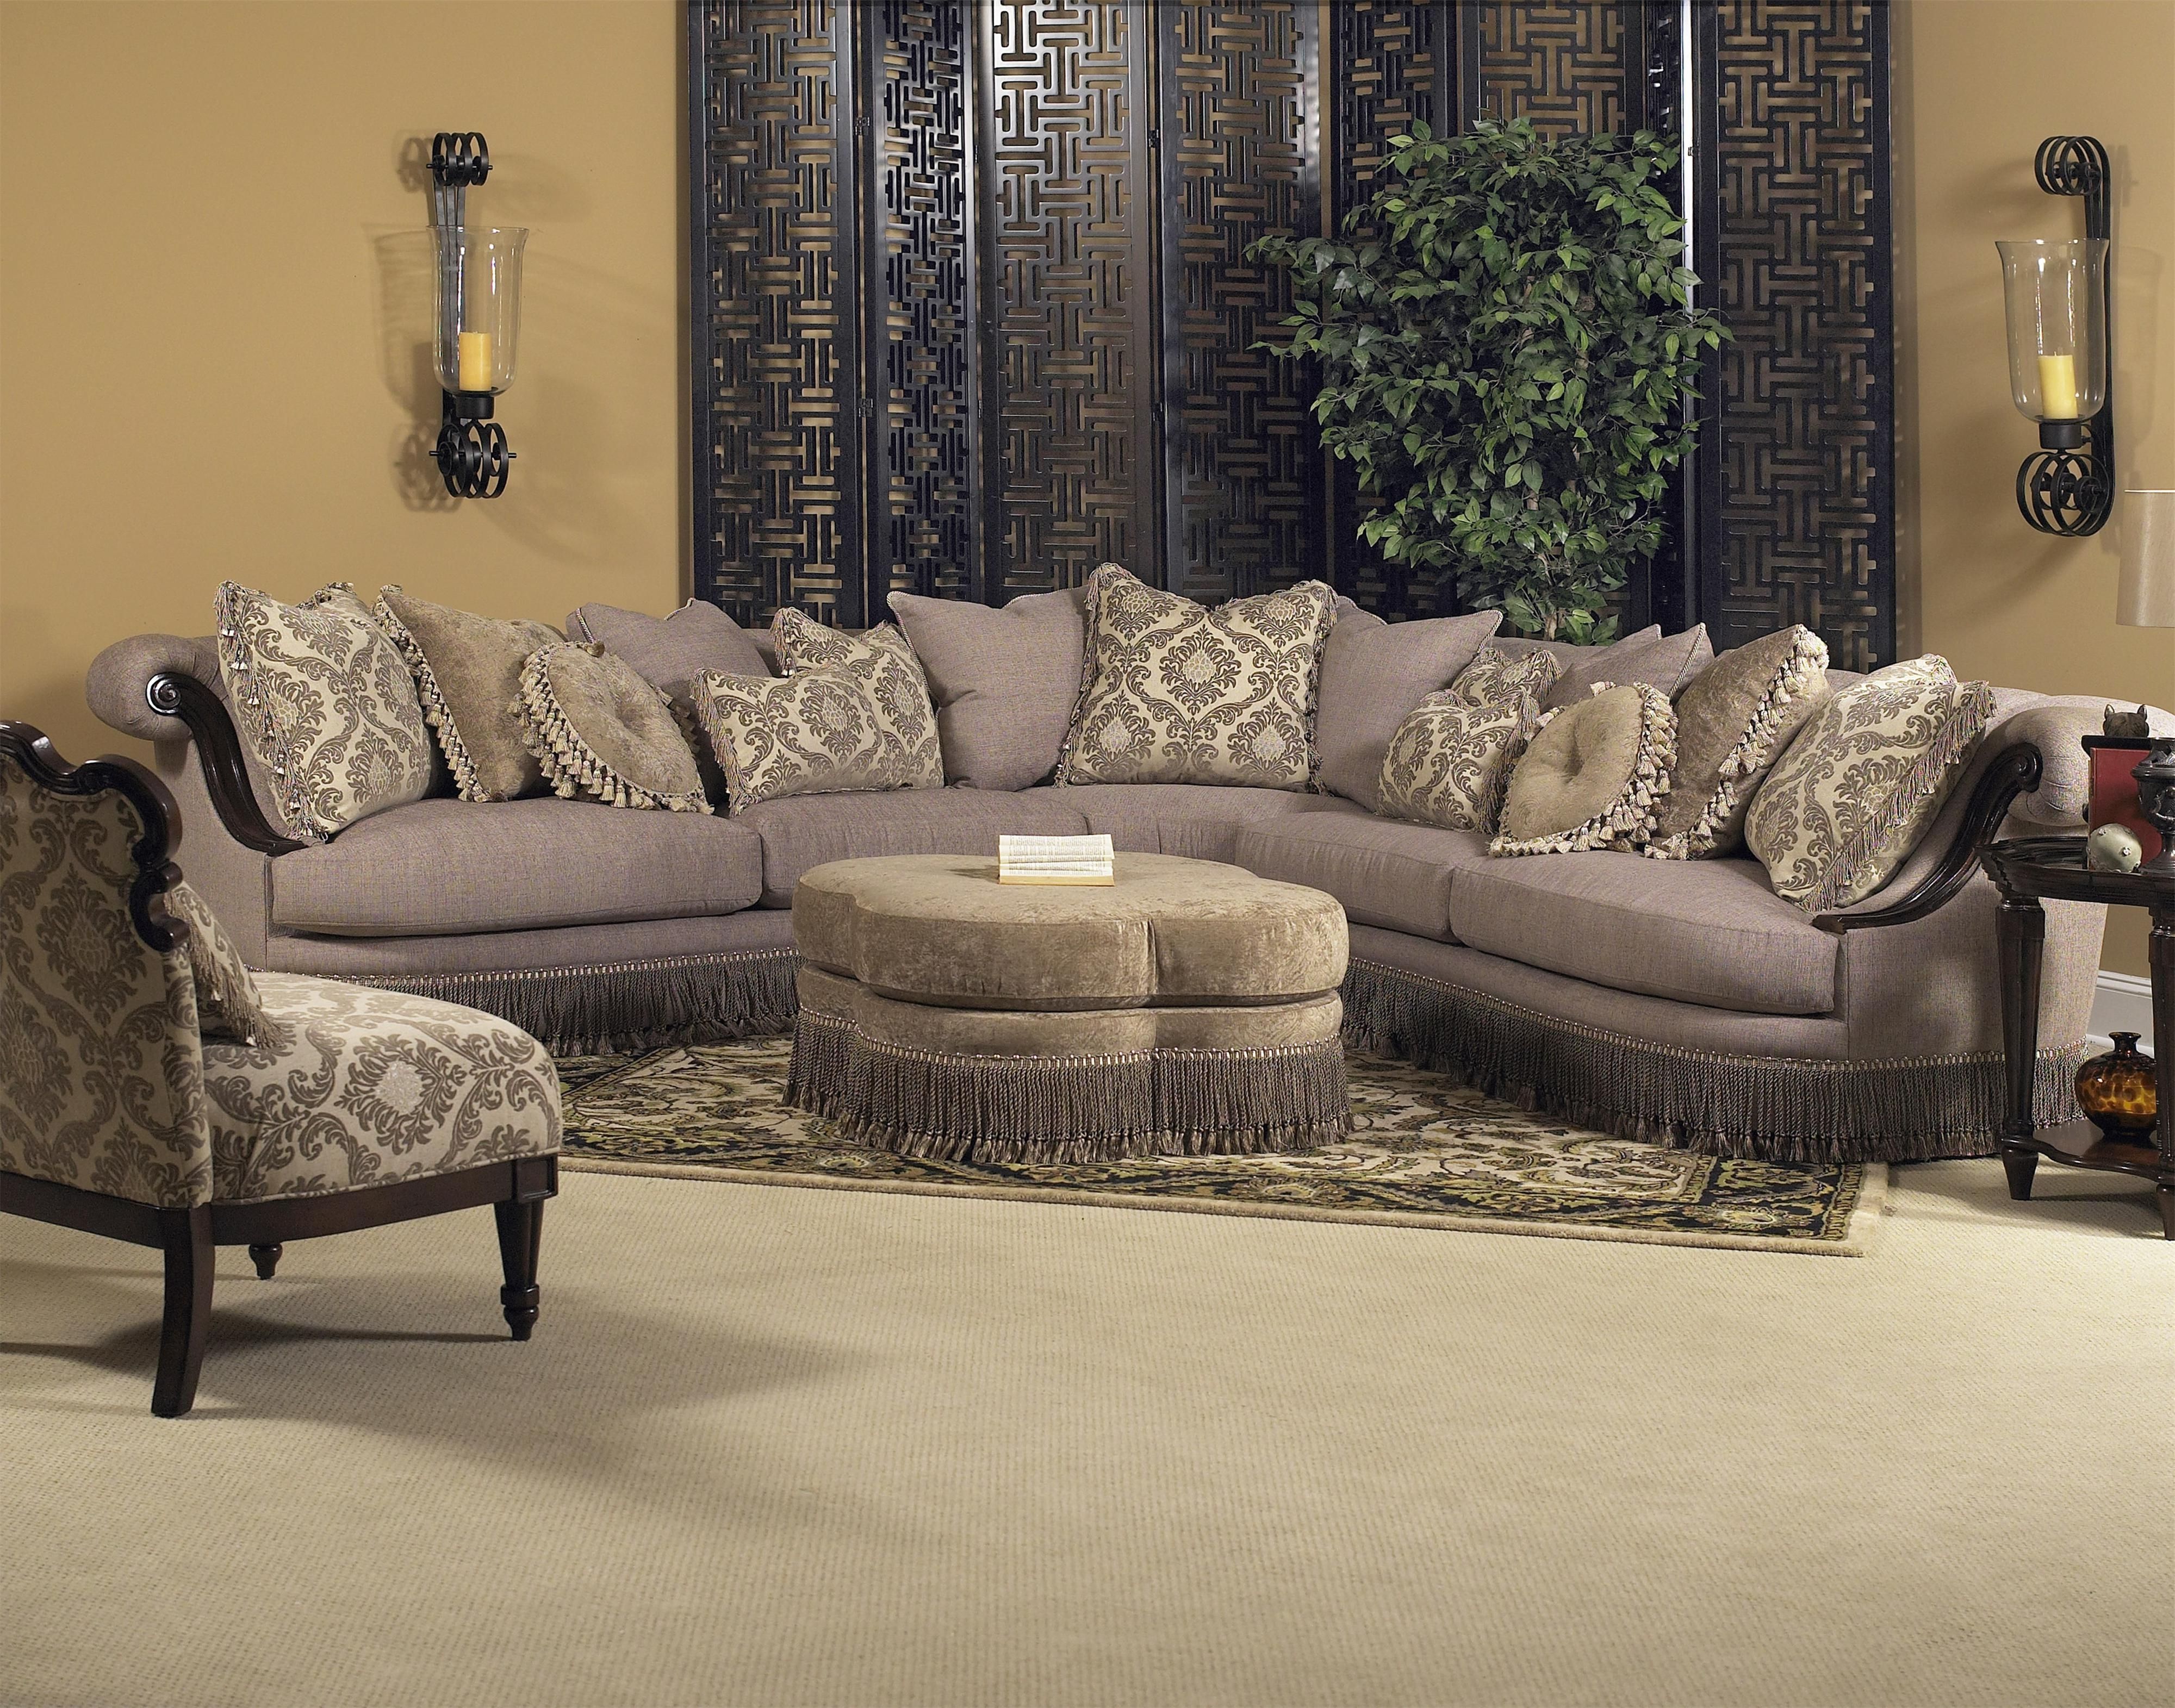 Newest Classic Wellingsley Sectionalfairmont Designs Available At Throughout Royal Furniture Sectional Sofas (View 2 of 15)